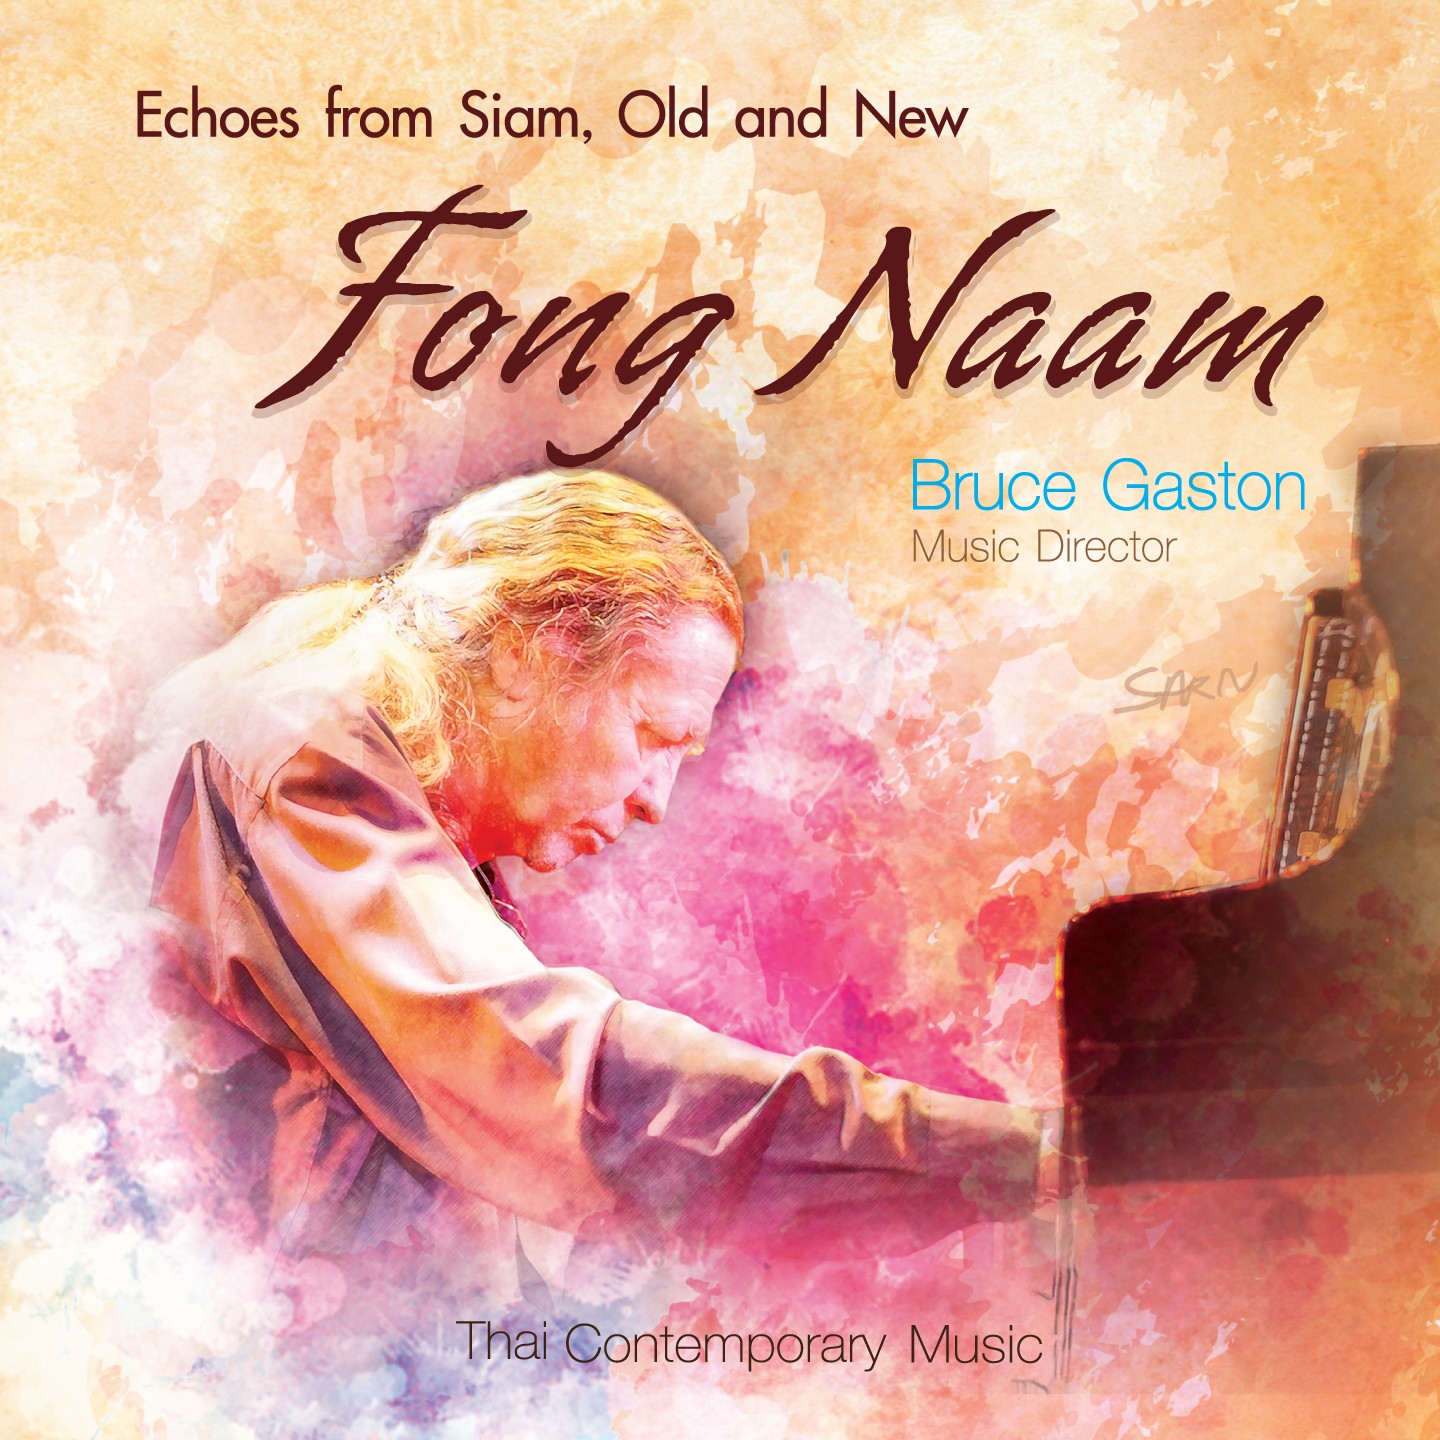 Fong Naam - Echoes from Siam, Old and New